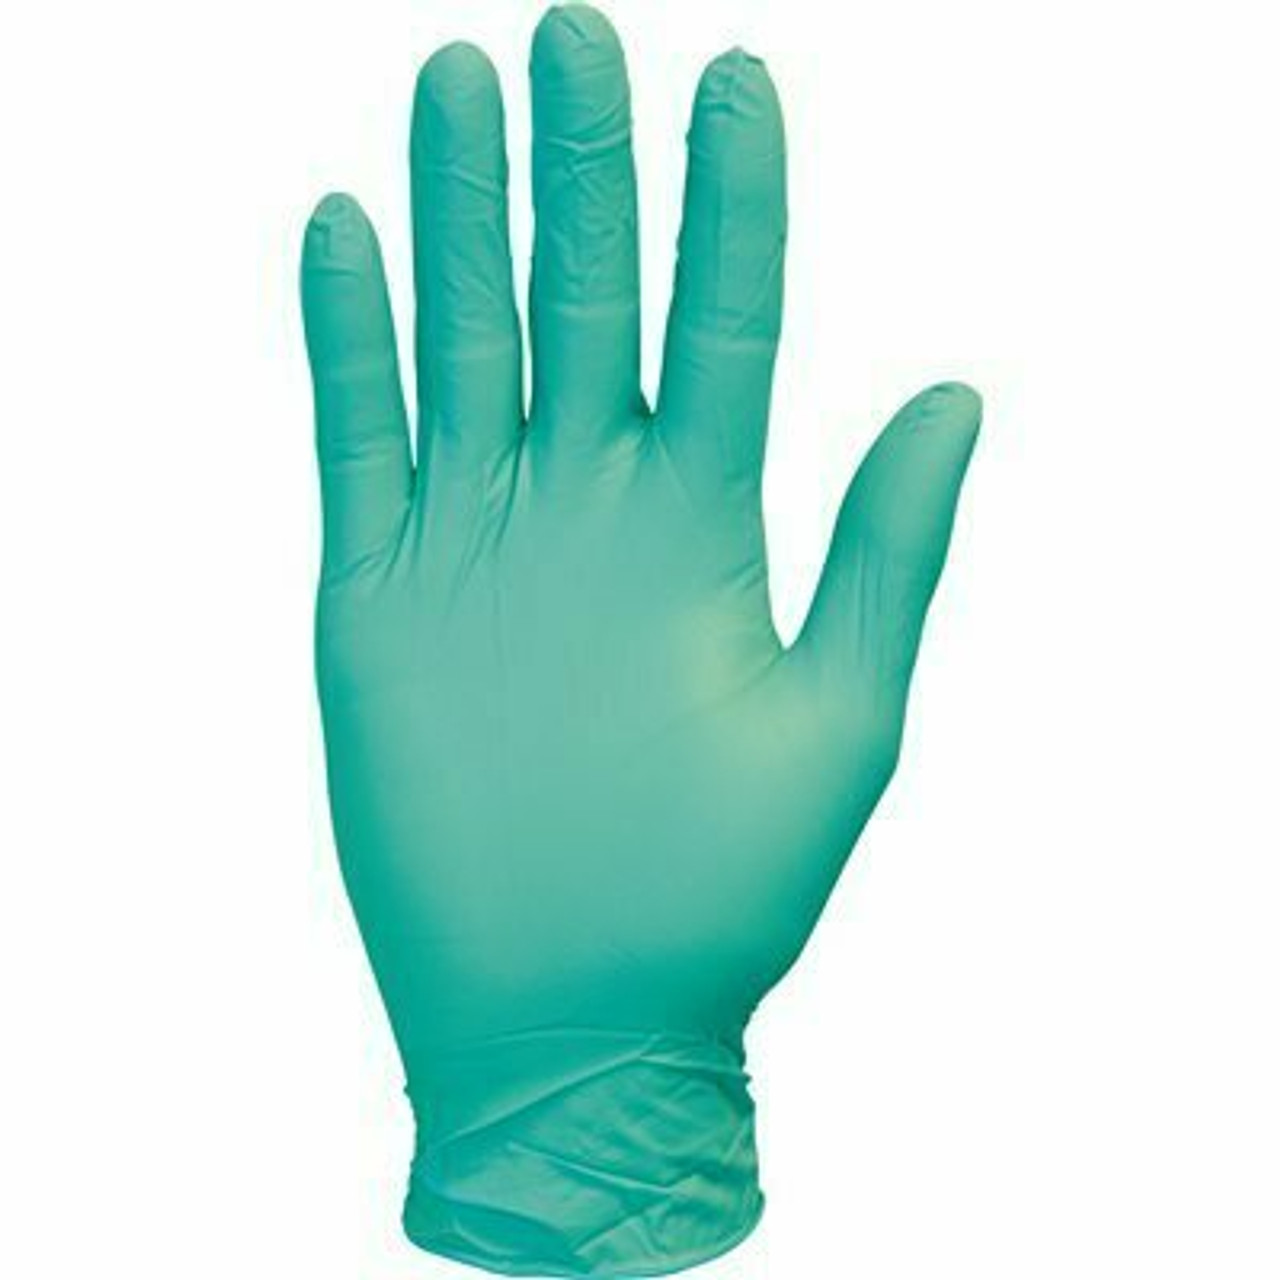 The Safety Zone Safety Zone Extra-Large Green Nitrile Gloves Powder Free Latex Free (1000 Per Case)